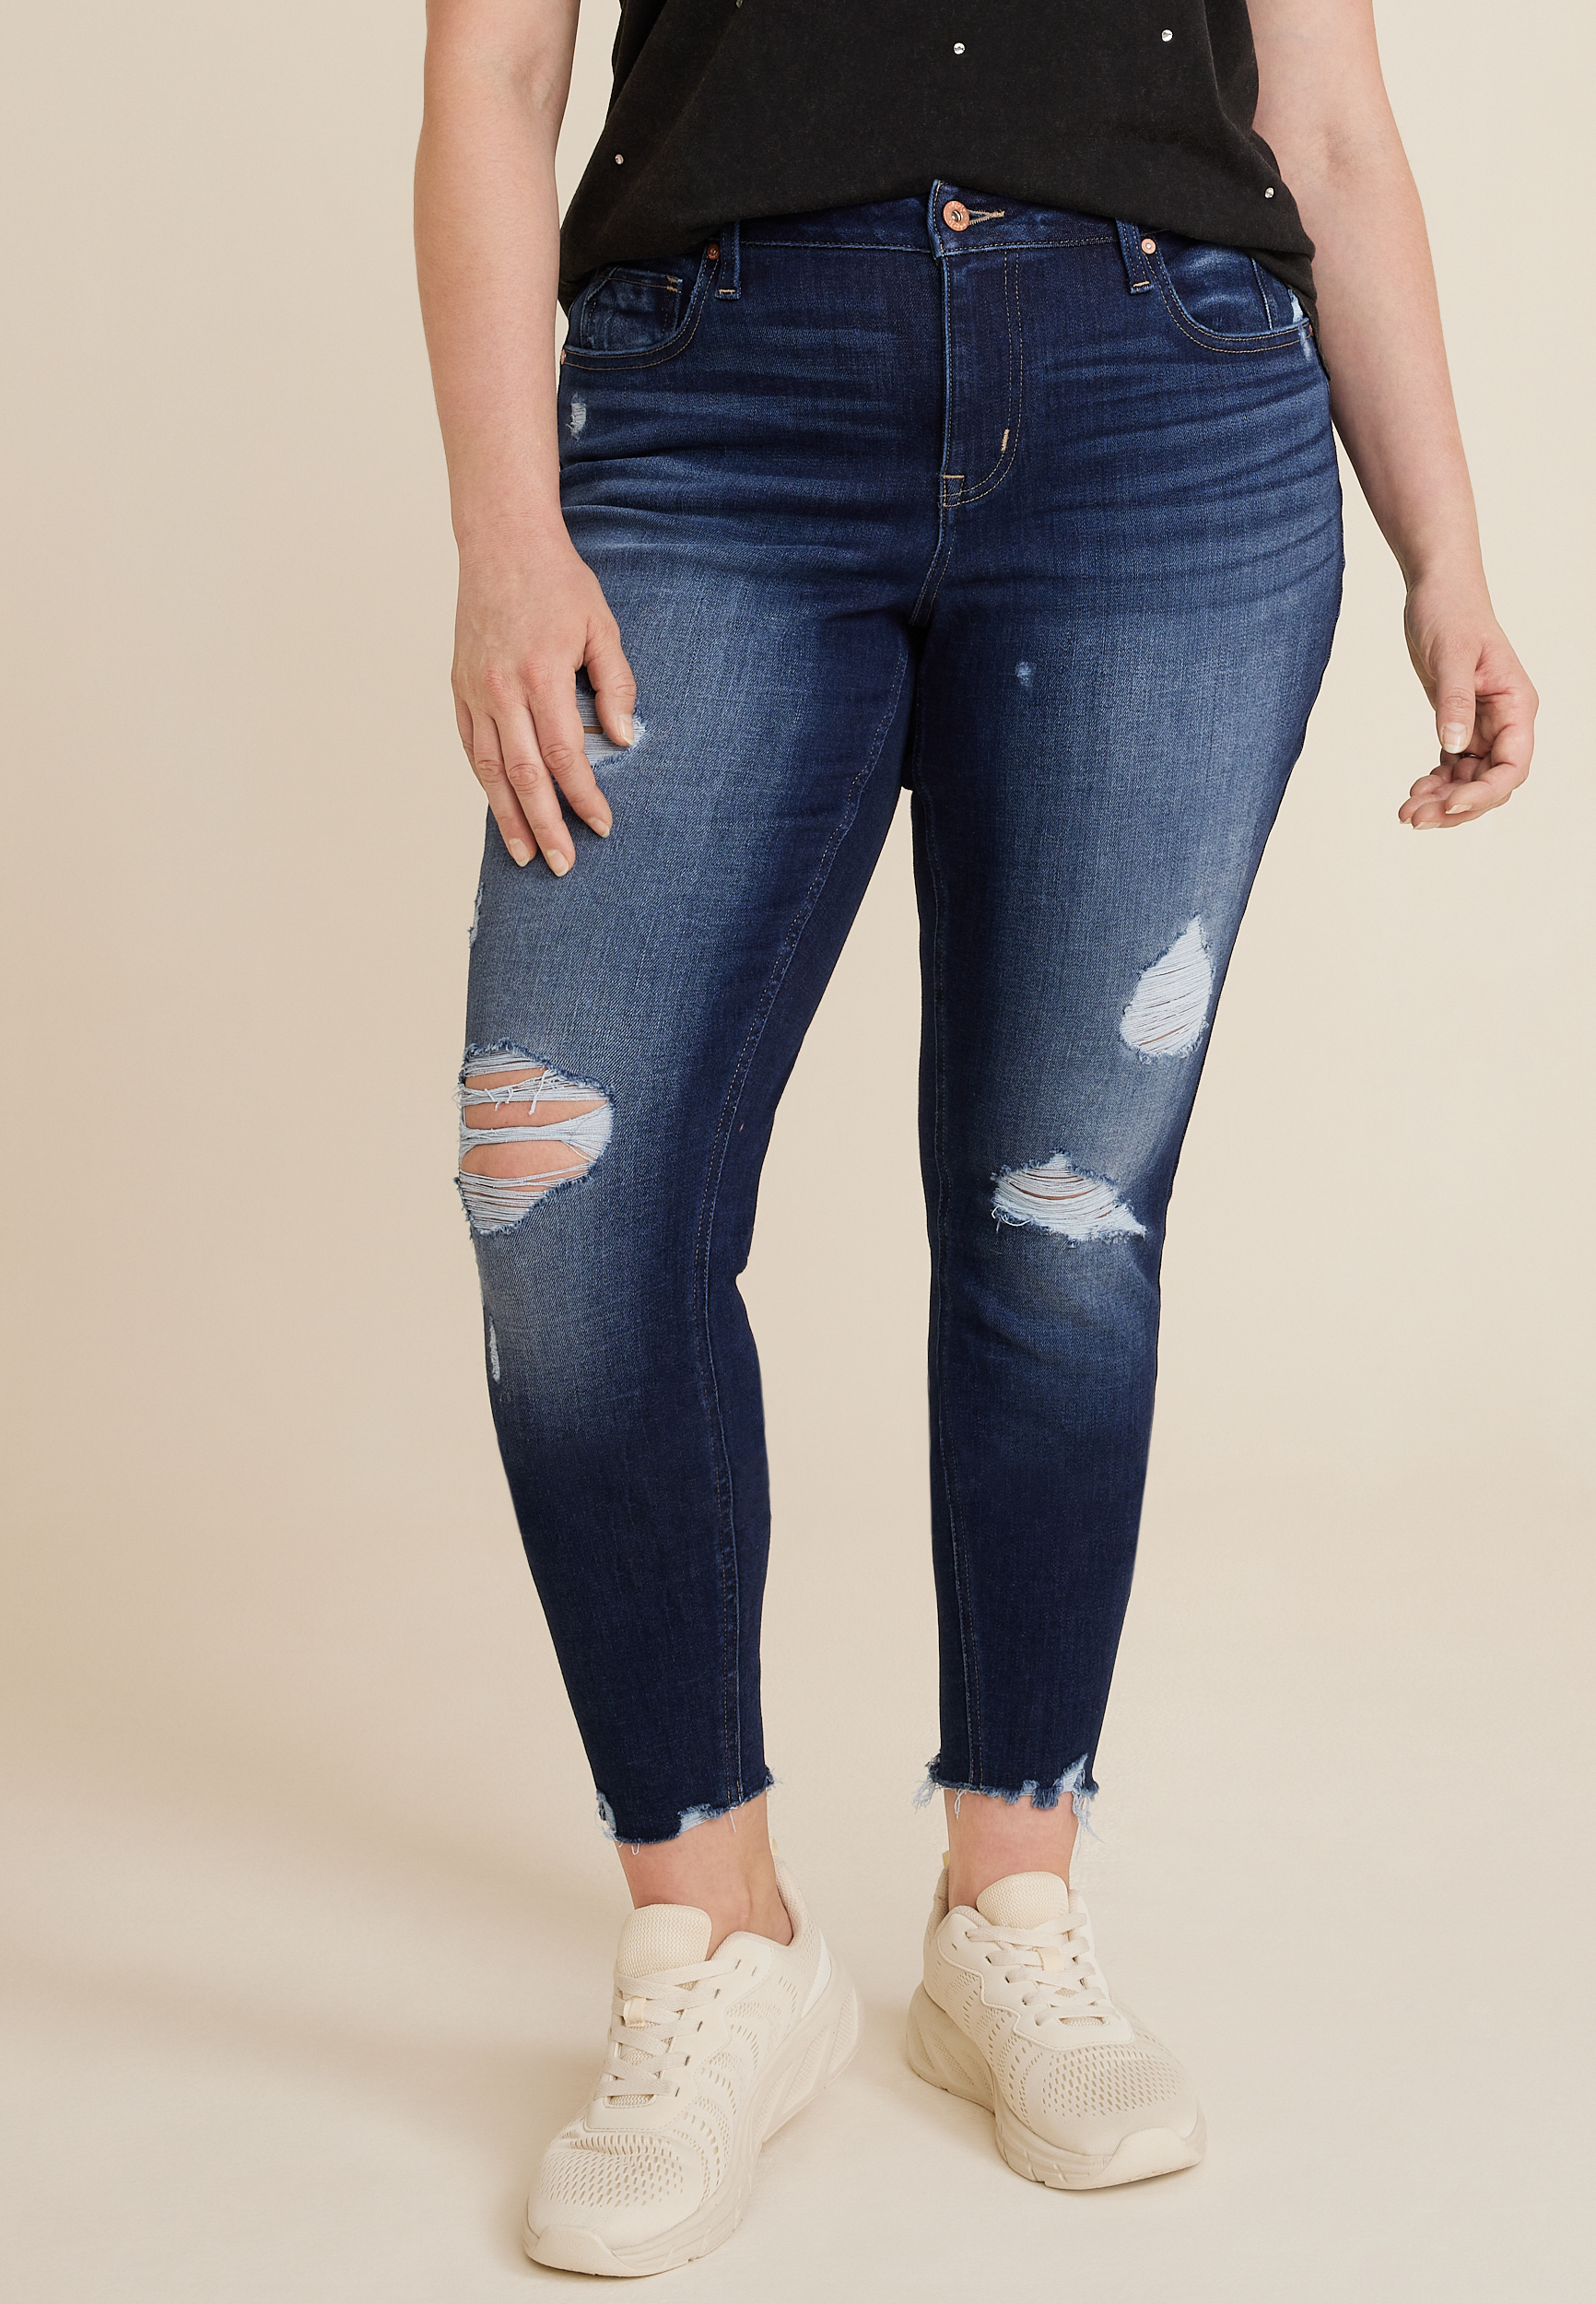 m jeans by maurices™ Cool Comfort Crossover High Rise Pull On Super Skinny  Jean